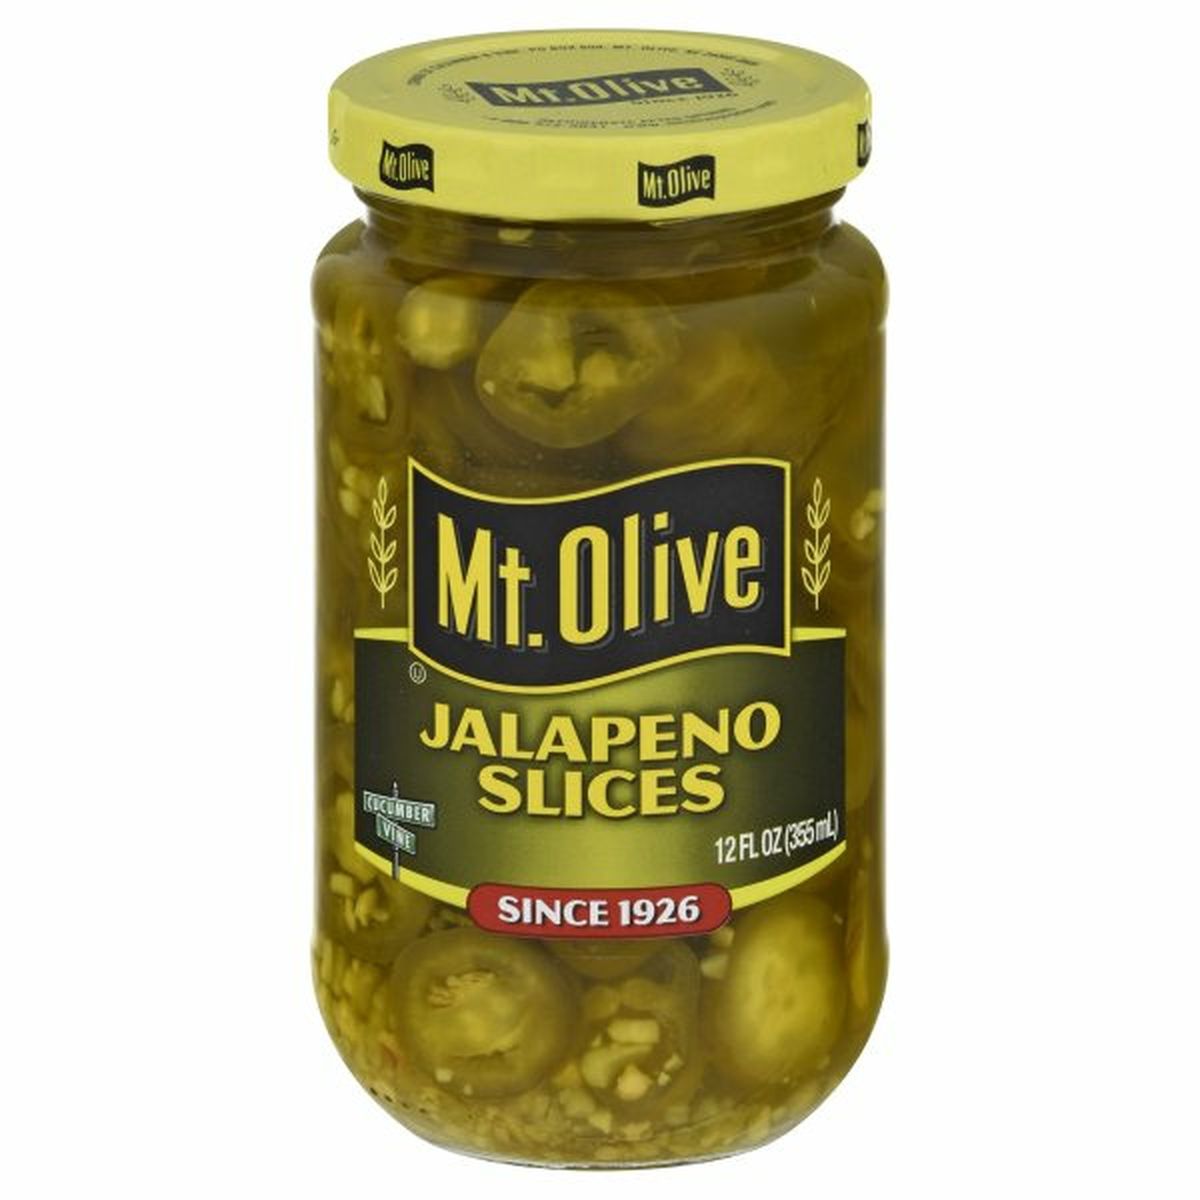 Calories in Mt. Olive Jalapeno Slices